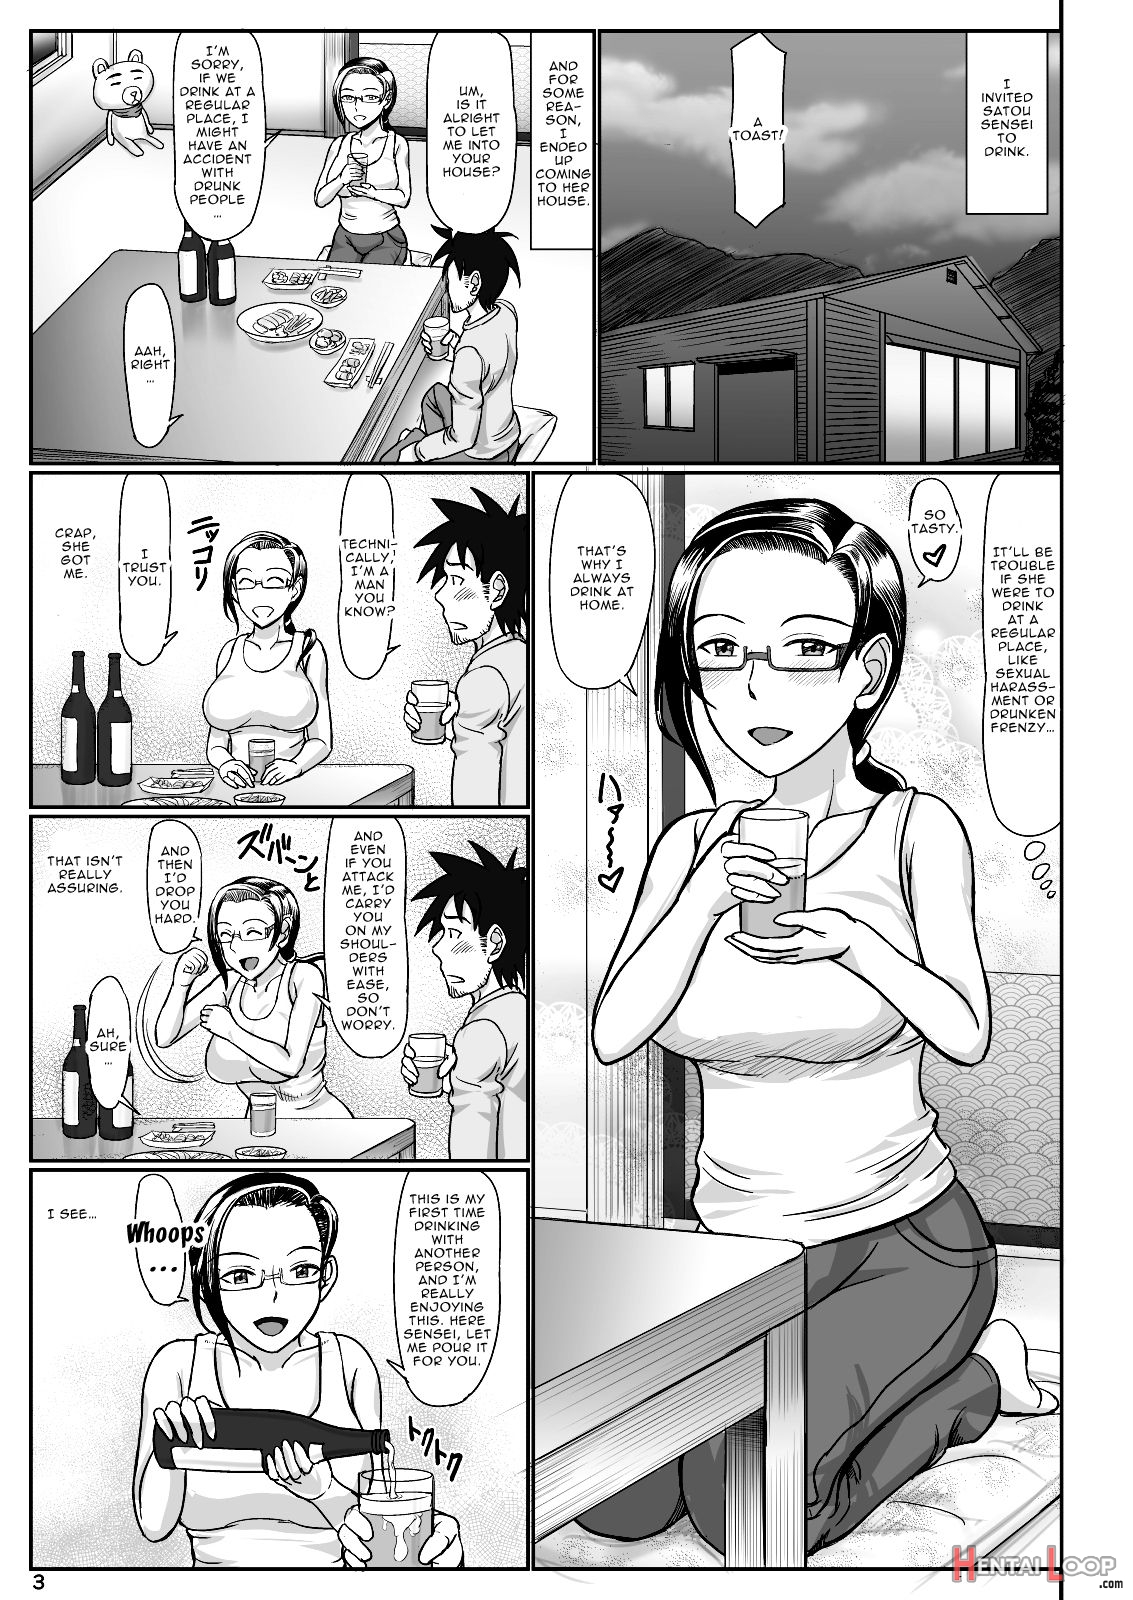 A Story About Getting Lewd With Succubus Sensei page 3